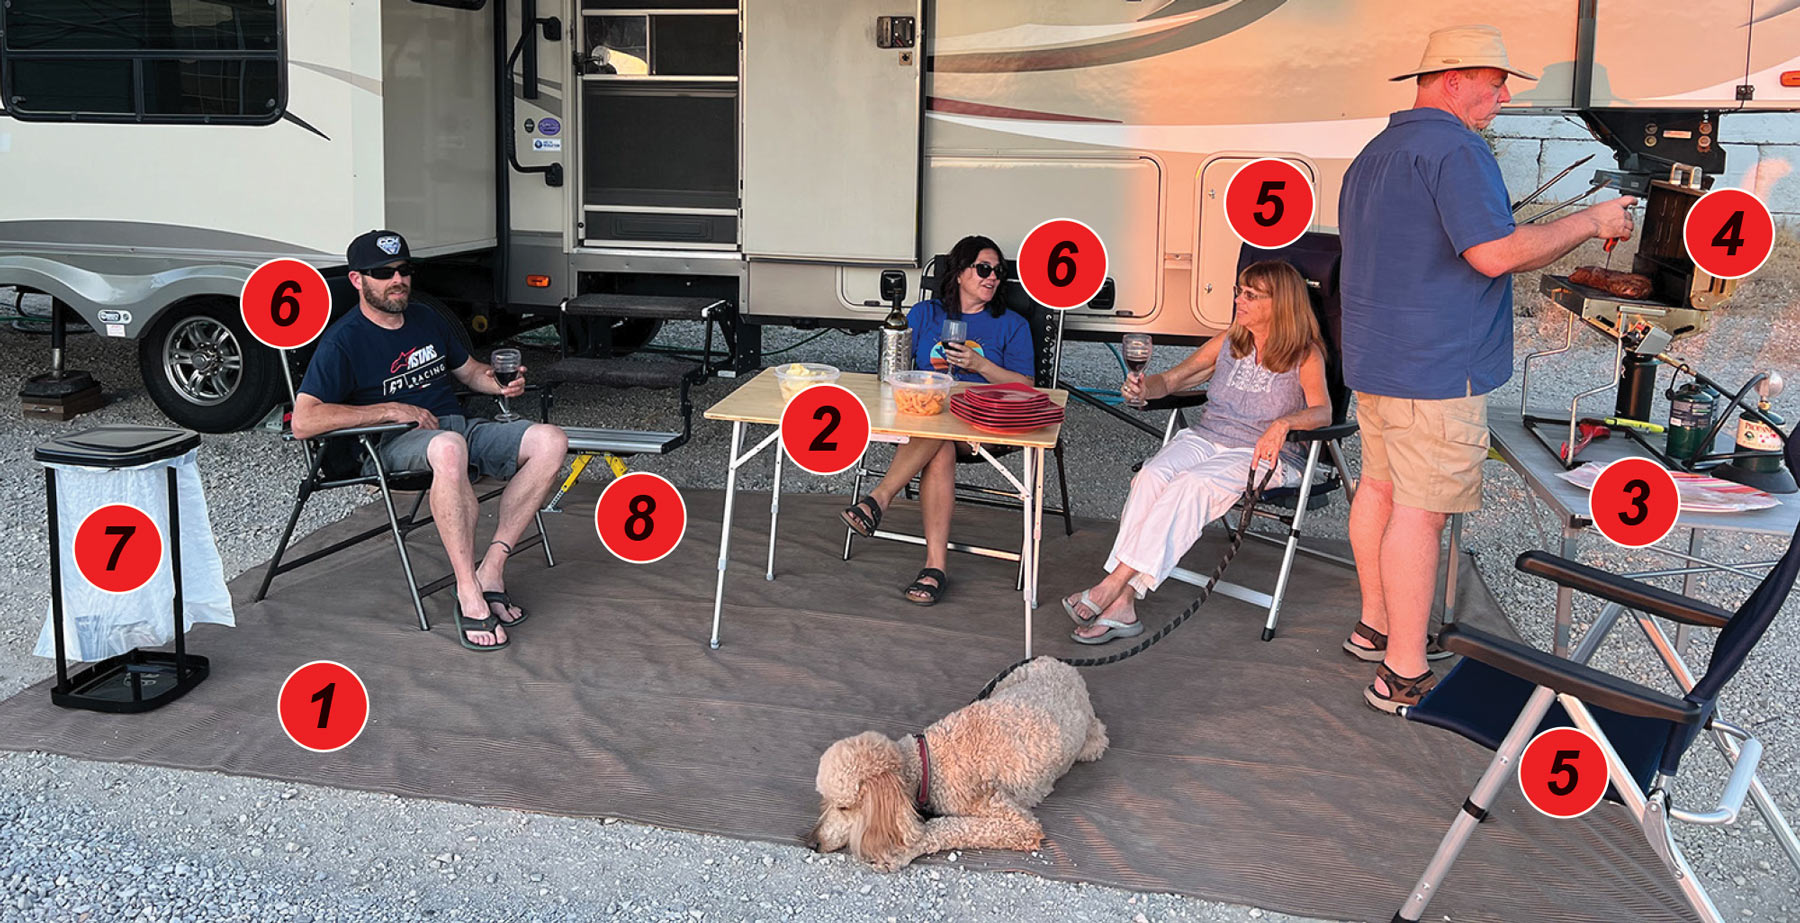 group of people having a barbecue outside their RV and the product their using are numbered